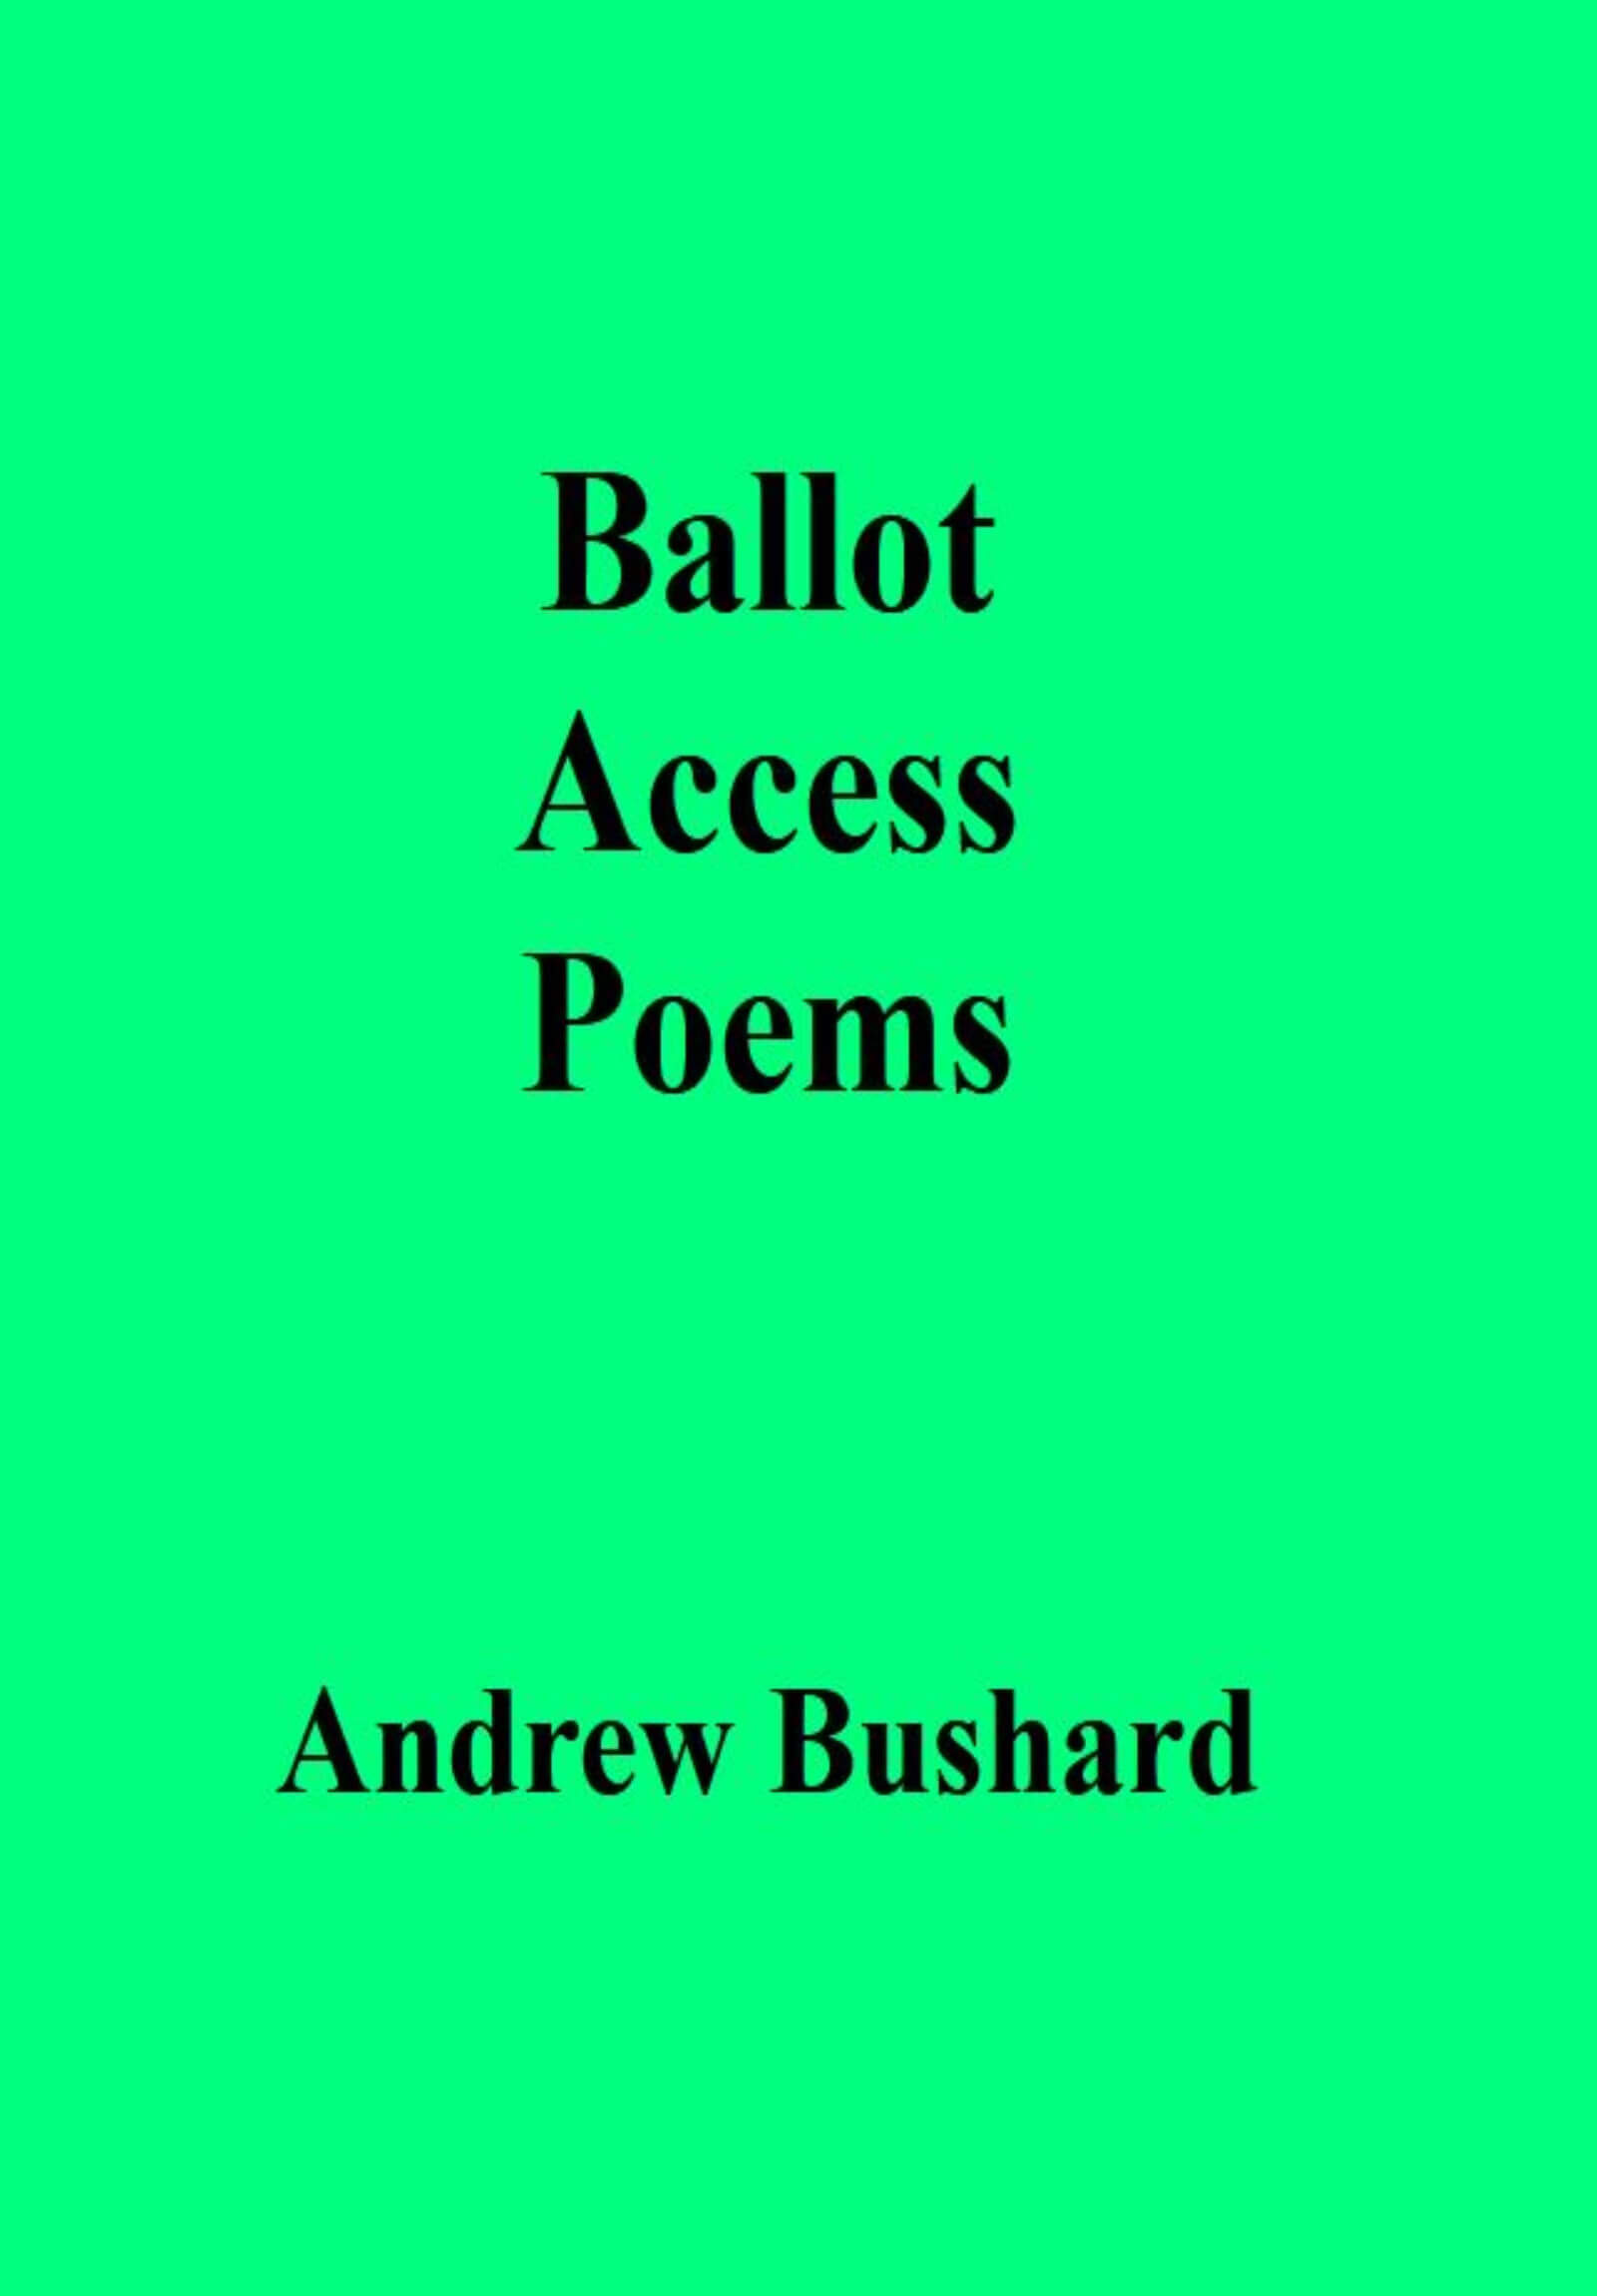 Ballot Access Poems's featured image